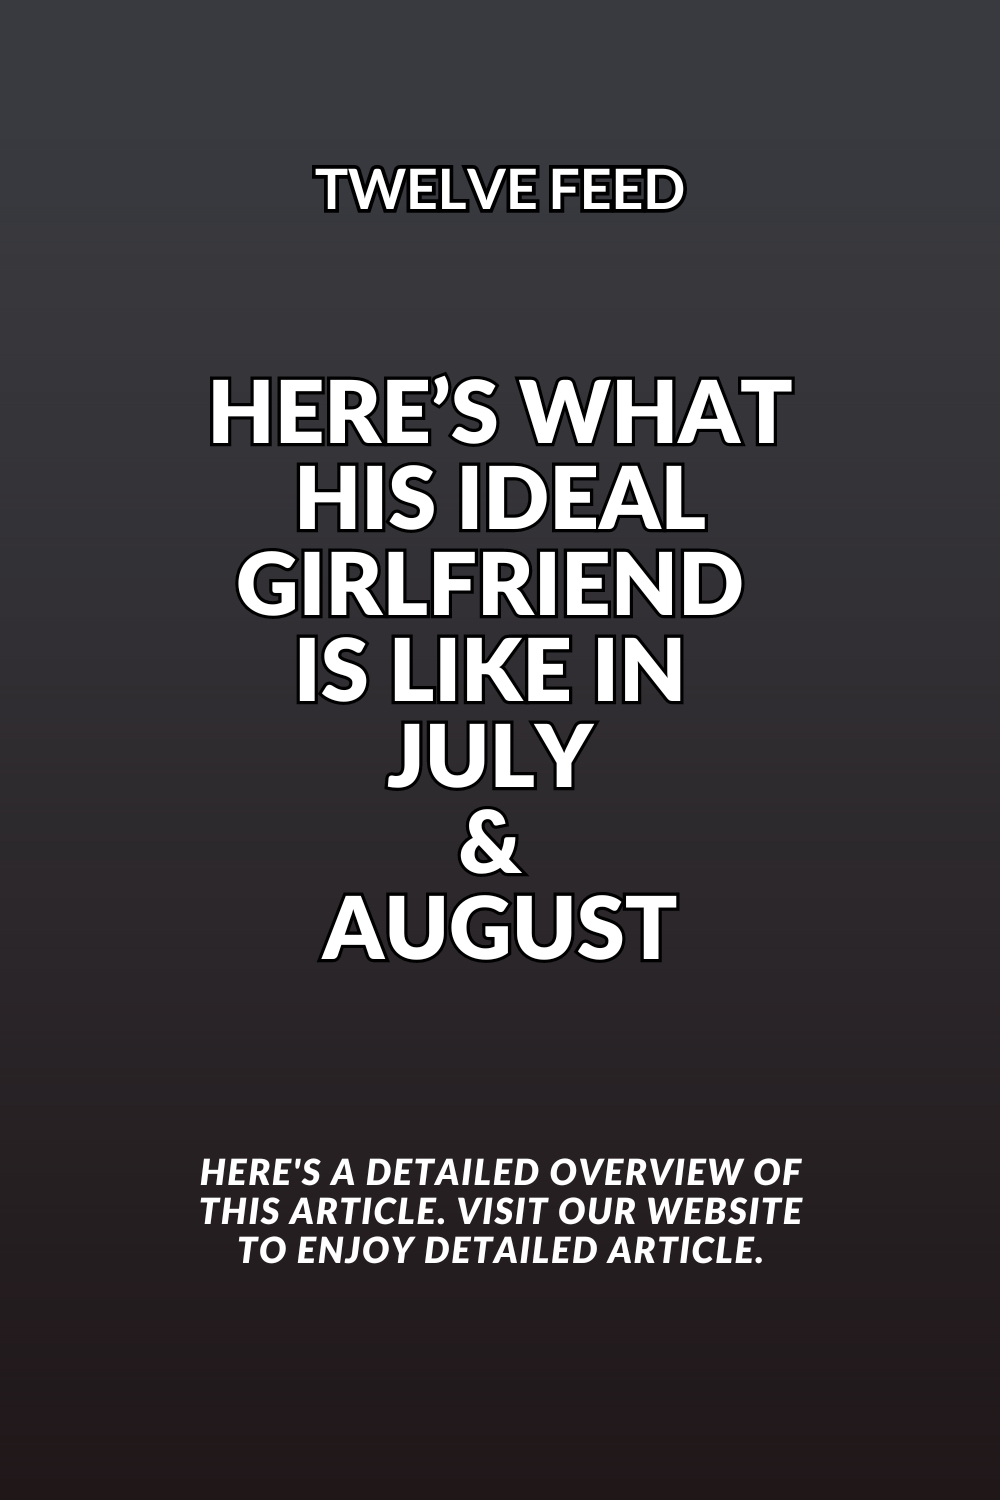 Here’s What His Ideal Girlfriend Is Like (& What She’s NOT Like) In July & August